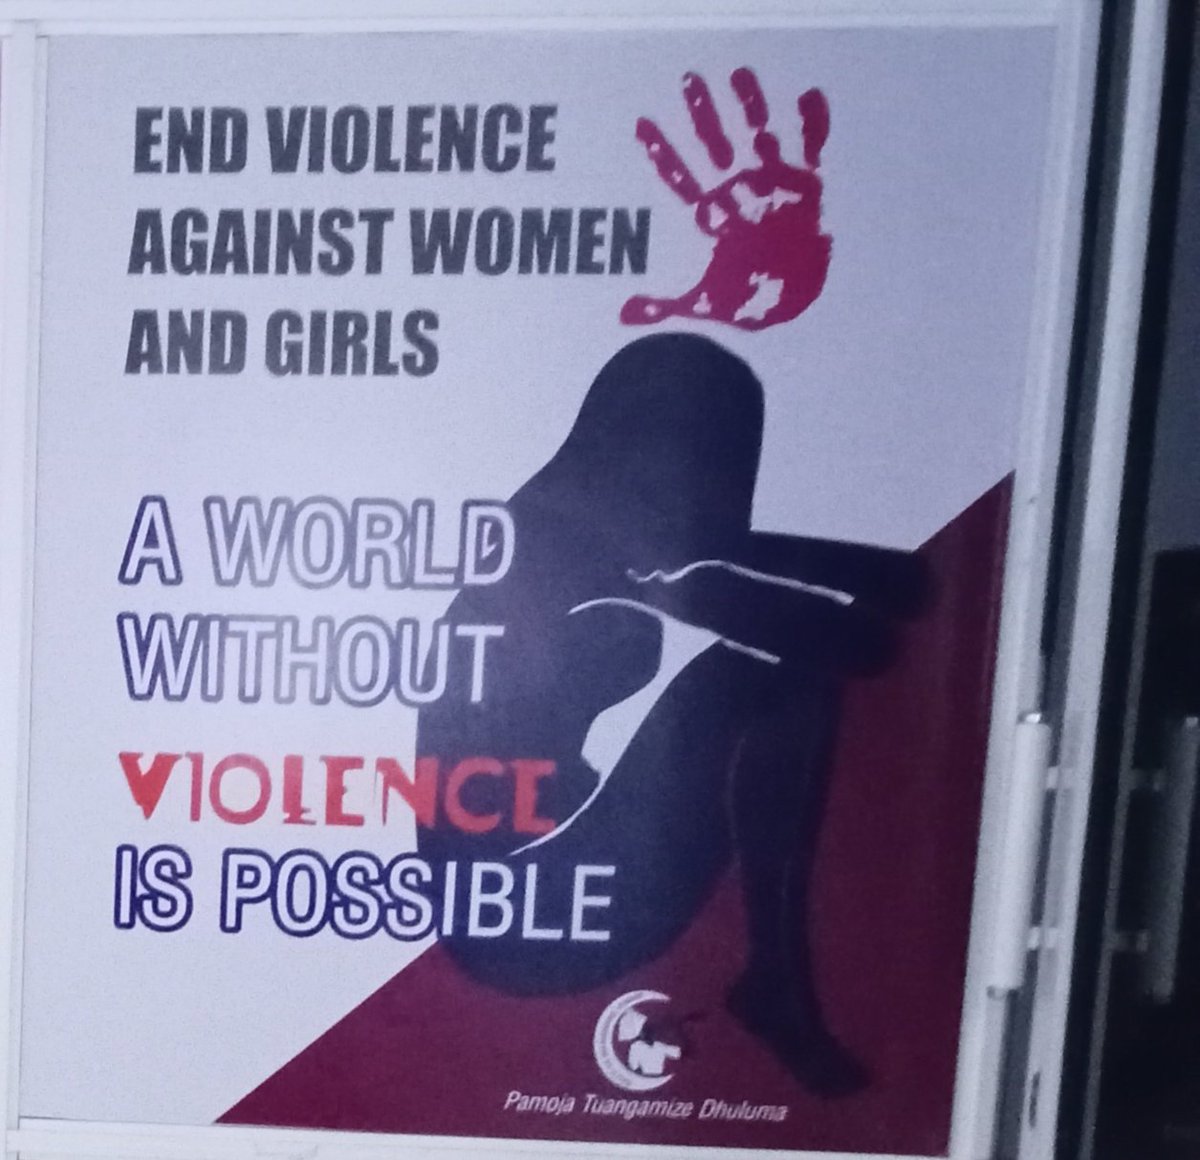 Violence against women and girls is a human rights violation. Therefore, sauti mobilizes and educates societies for action against  Violence against women and girls, promotes and protects women's and children's rights.
#SautiYaWanawakePwani
#ENDGBV
#womenrightsarehumanrights